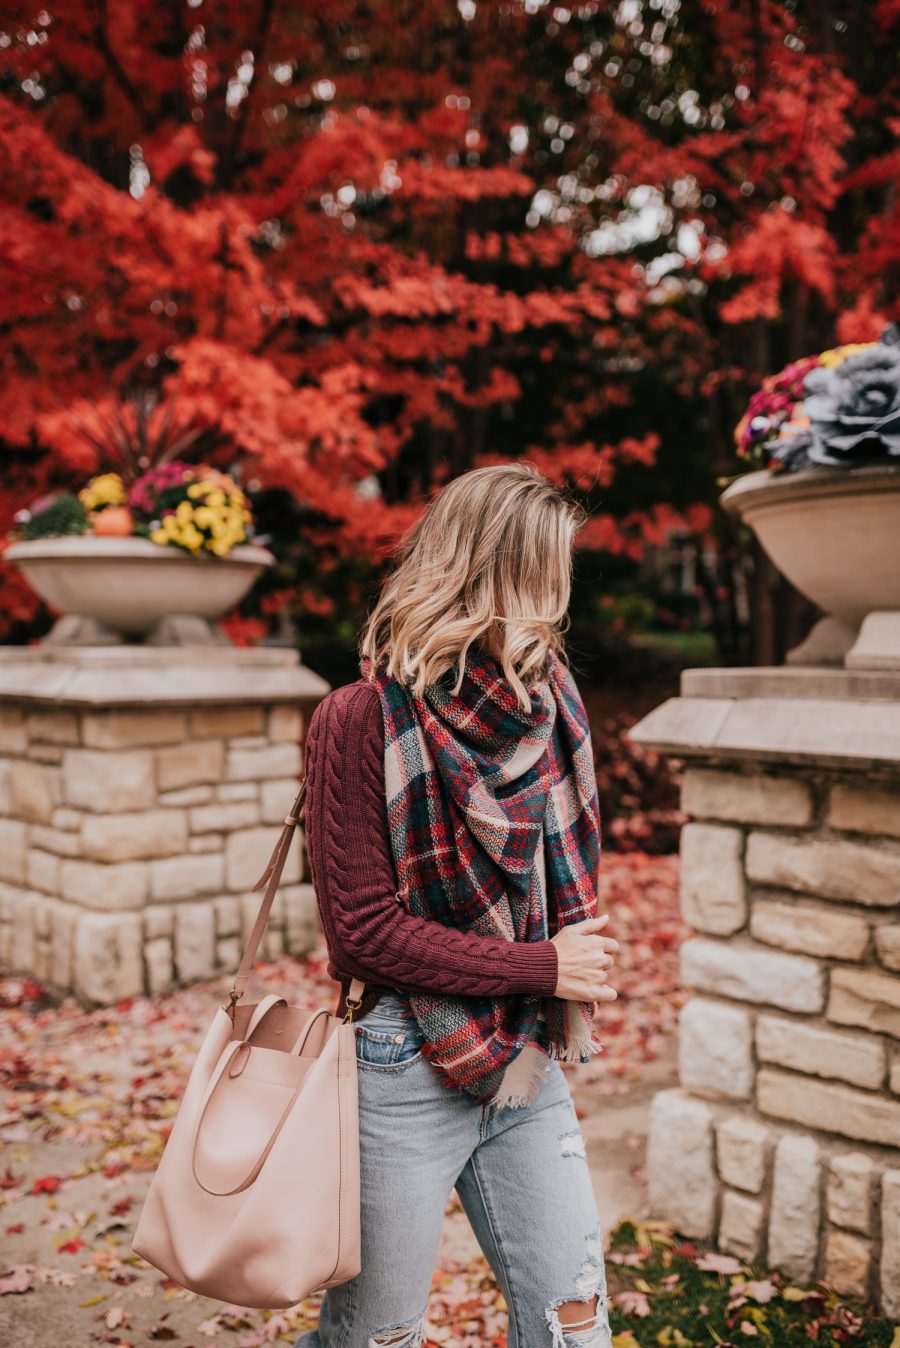 Thanksgiving outfit ideas: Suzanne wearing a burgundy sweater, plaid scarf, denim jeans, and pink tote